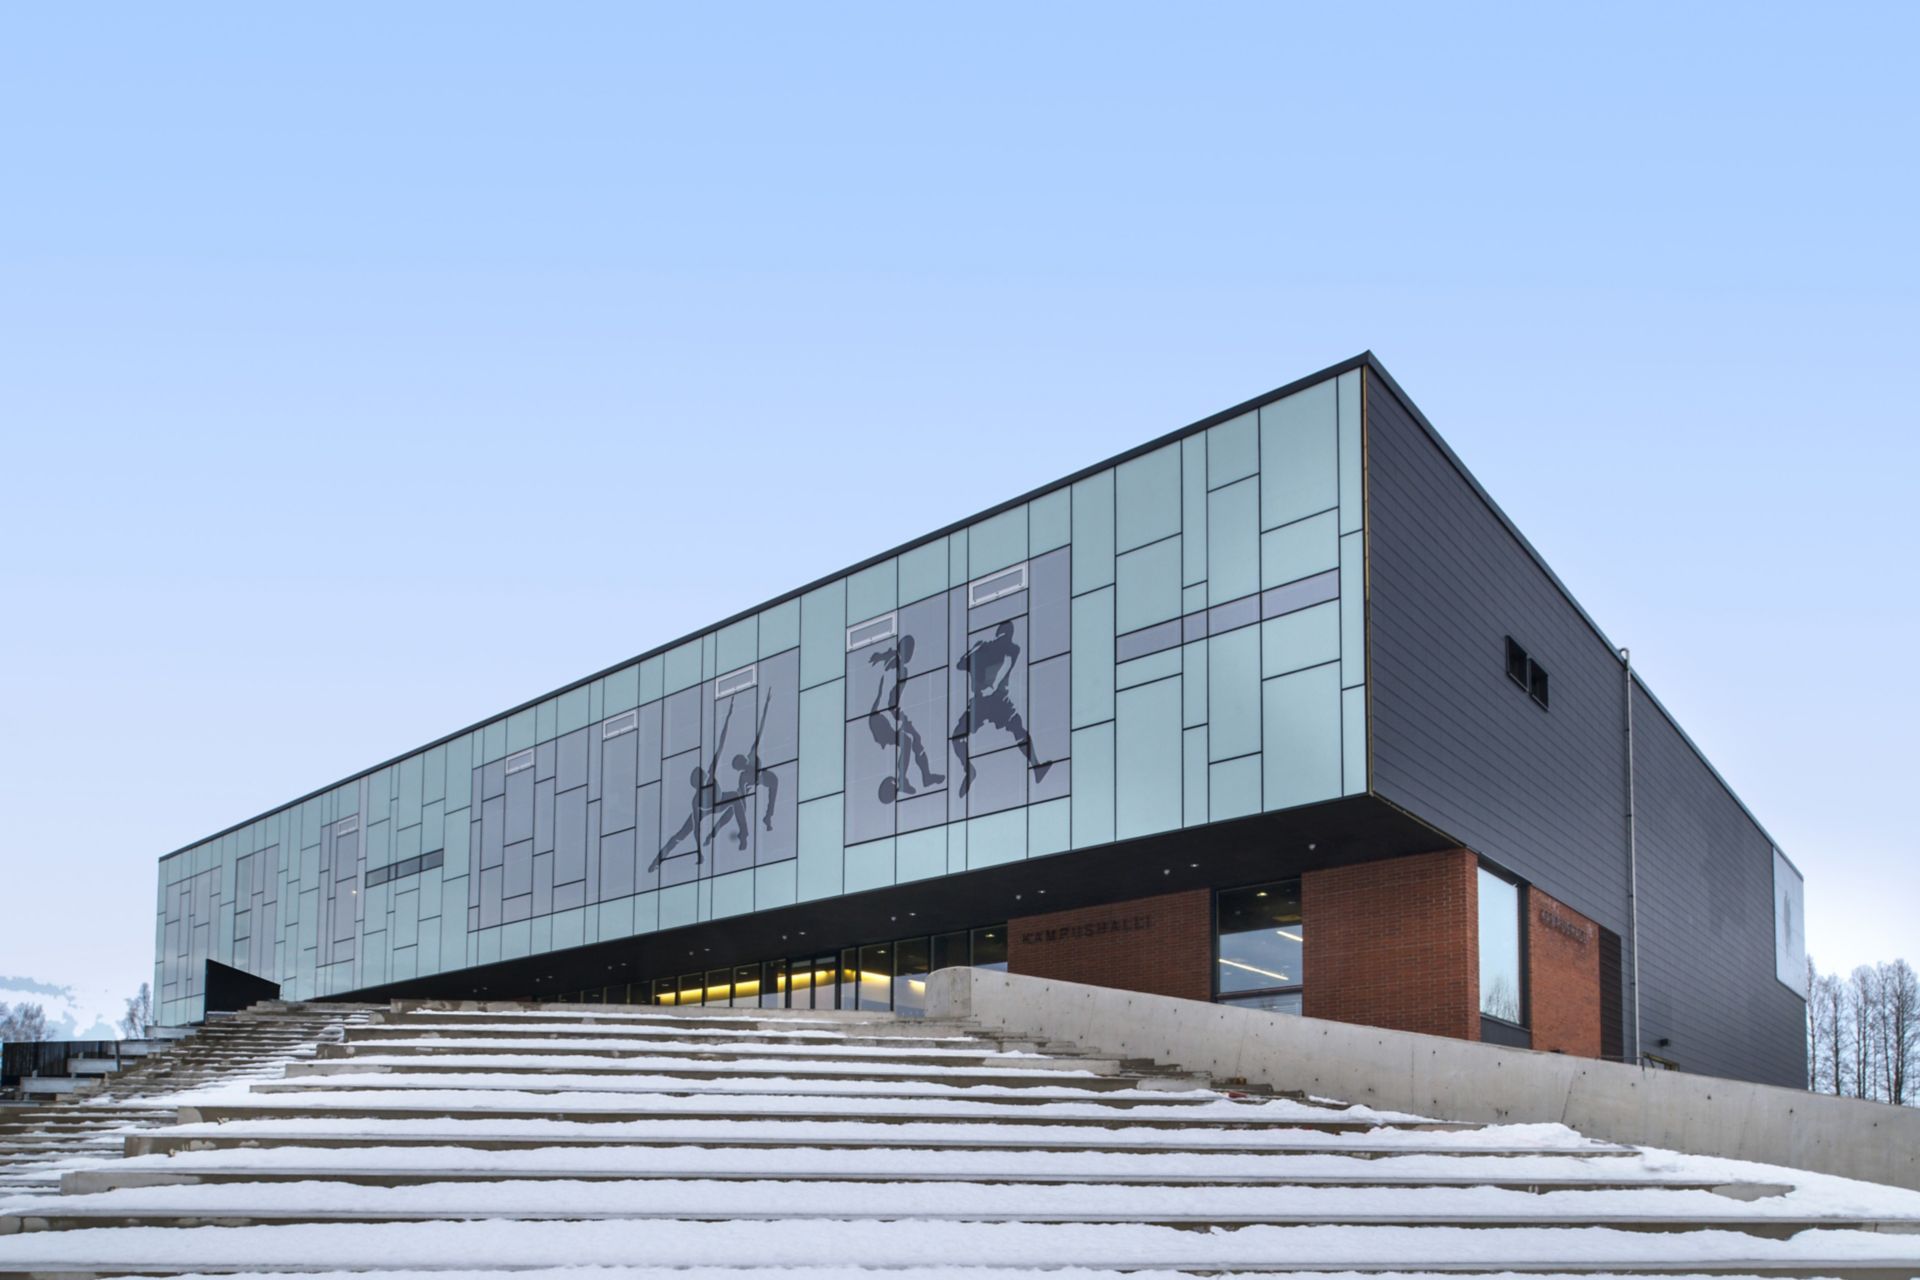 The building of Kokkola Campus in Finland